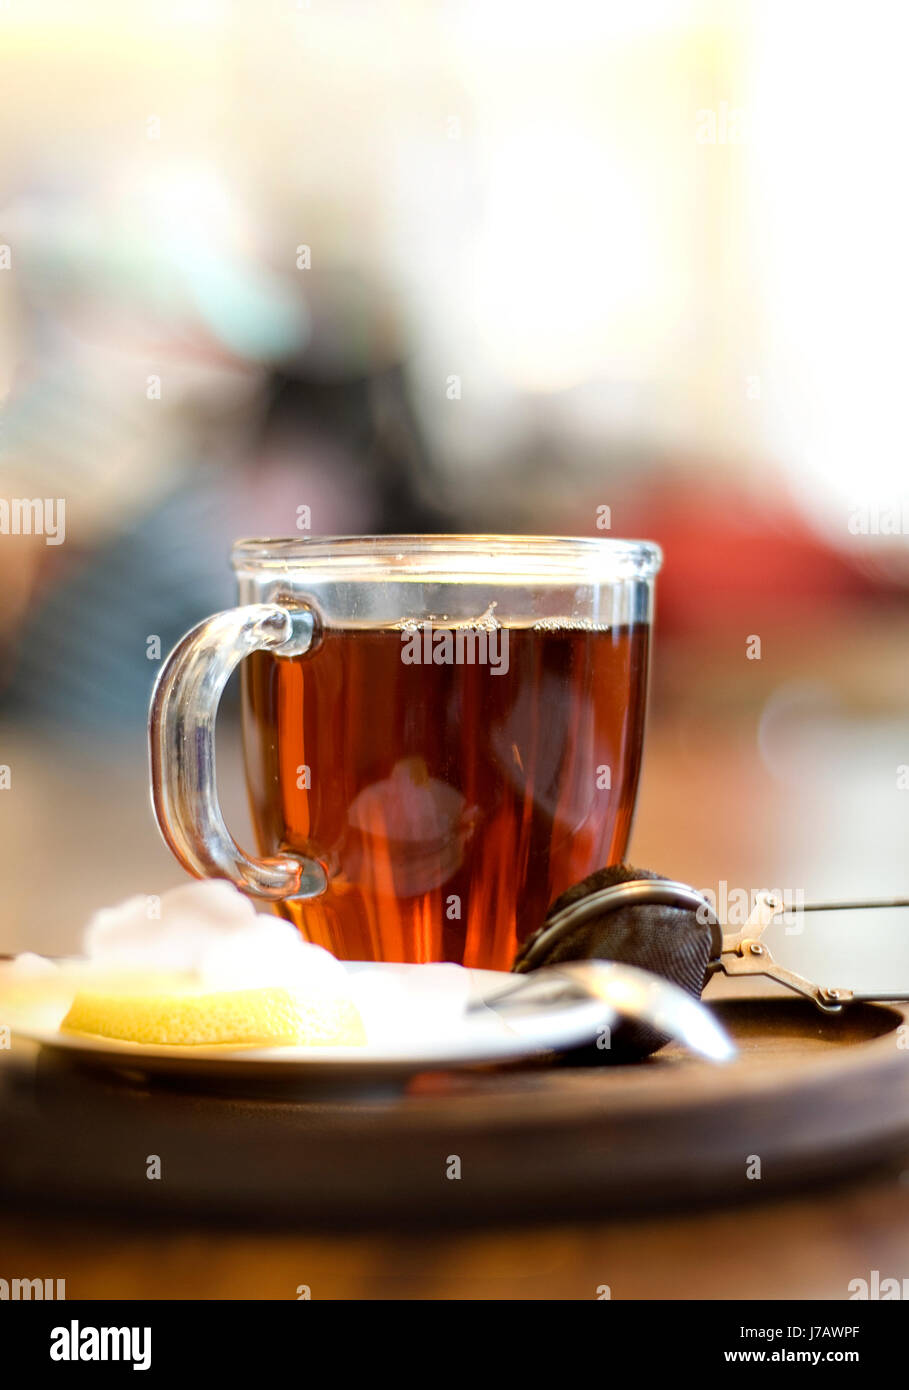 tea hot cold catarrh day during the day close cup glass chalice tumbler tea Stock Photo